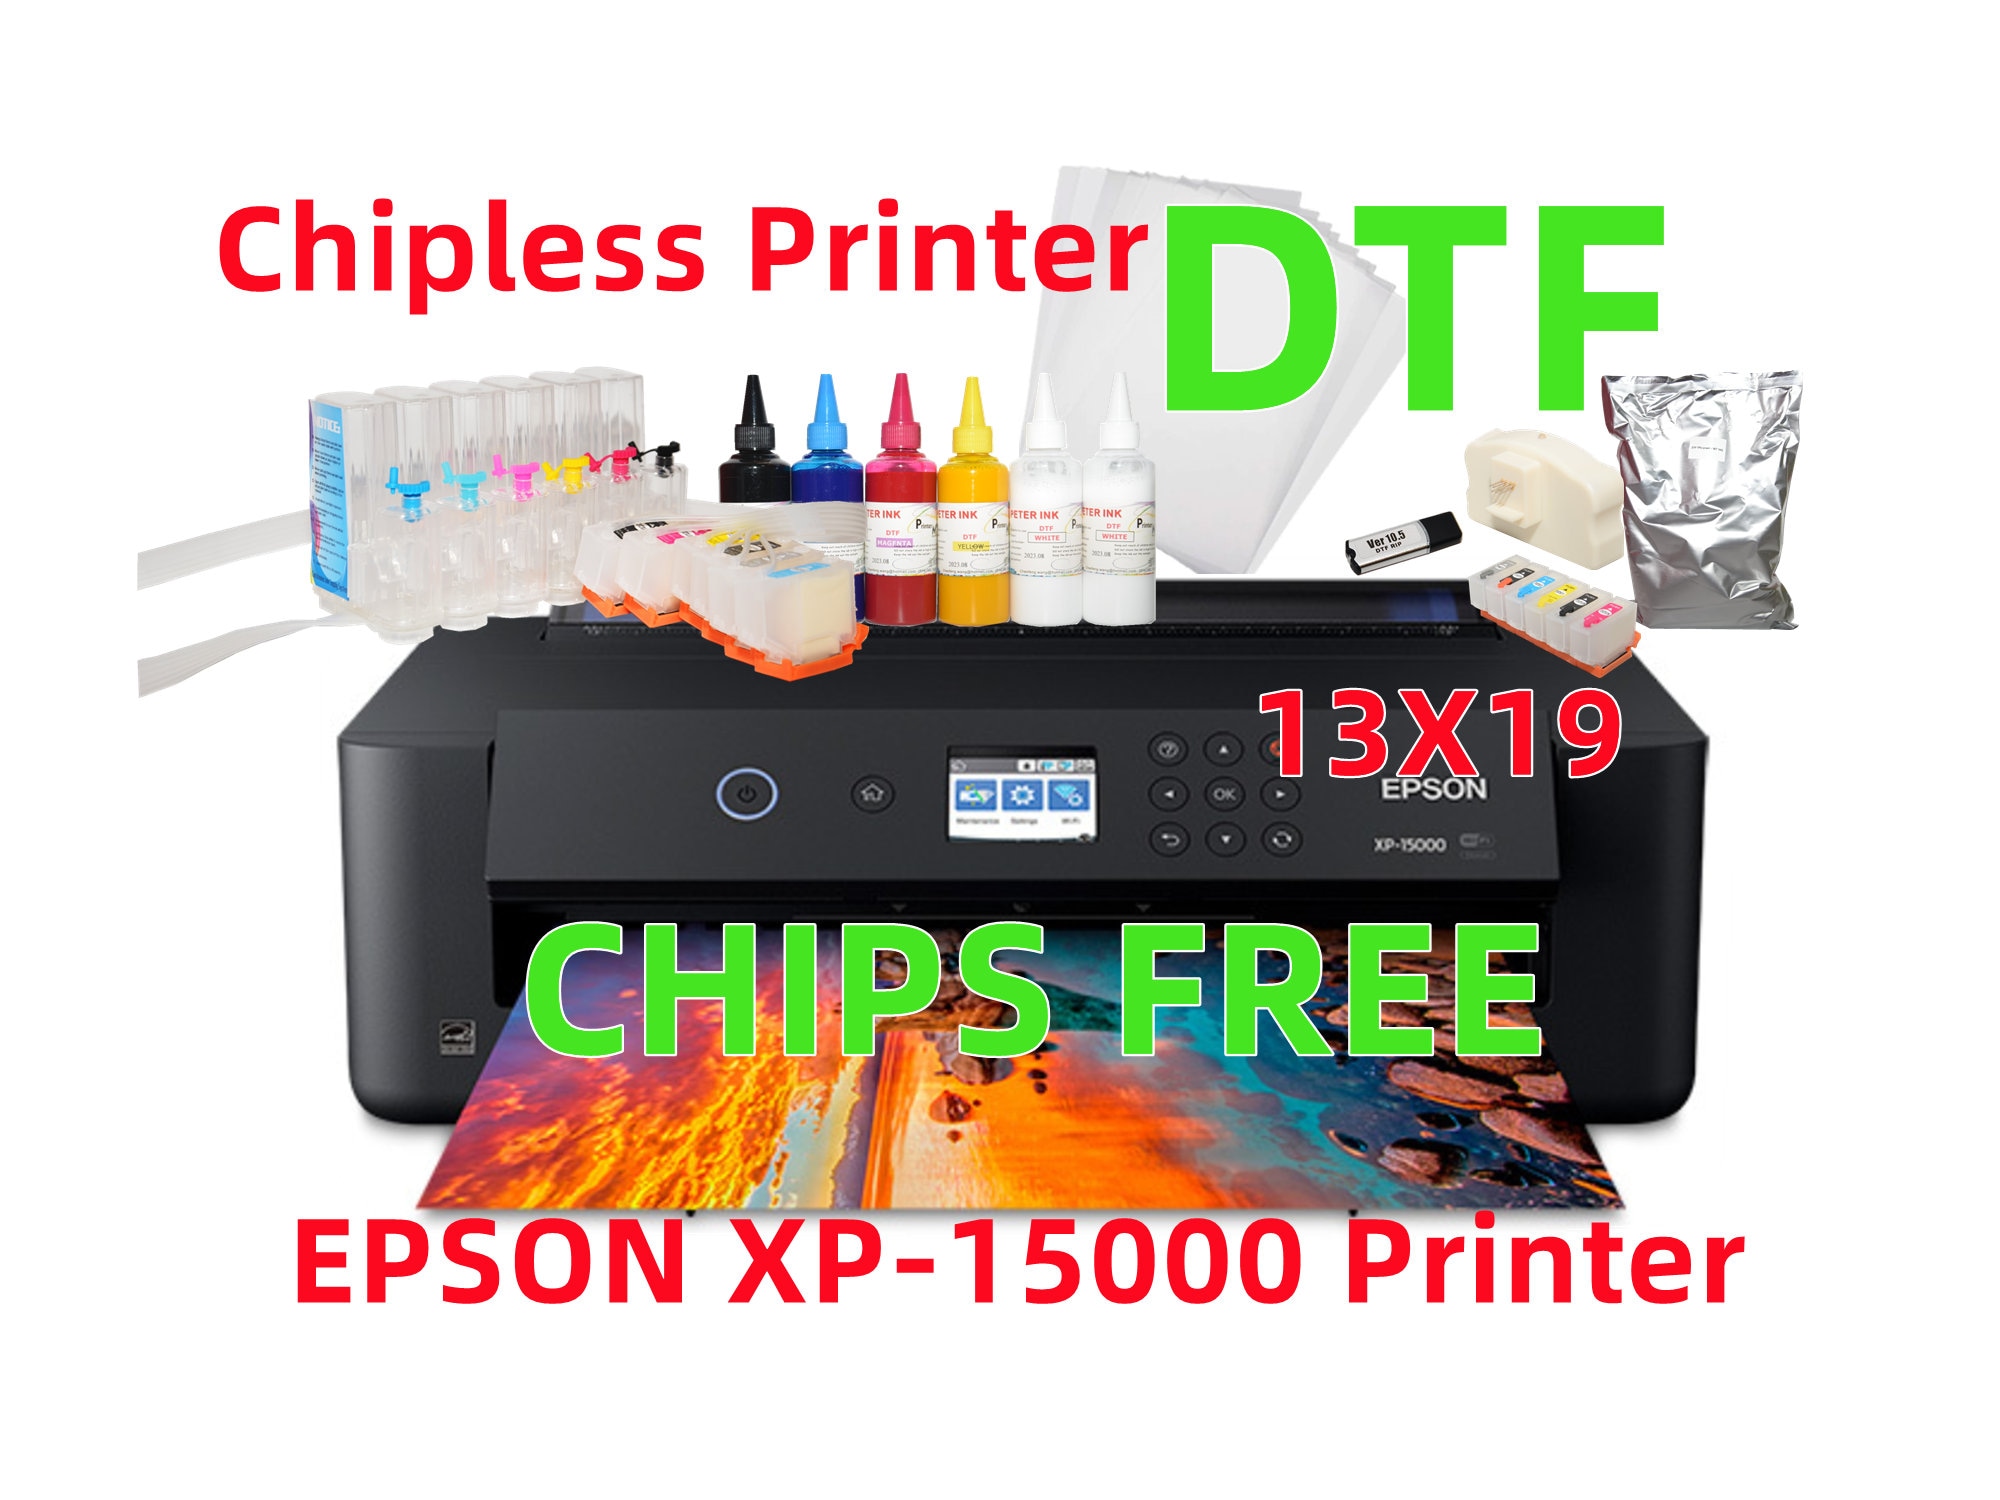 RED PANDA DTF PRINTER 11.7 With Mini Oven Bundle (sheet function)